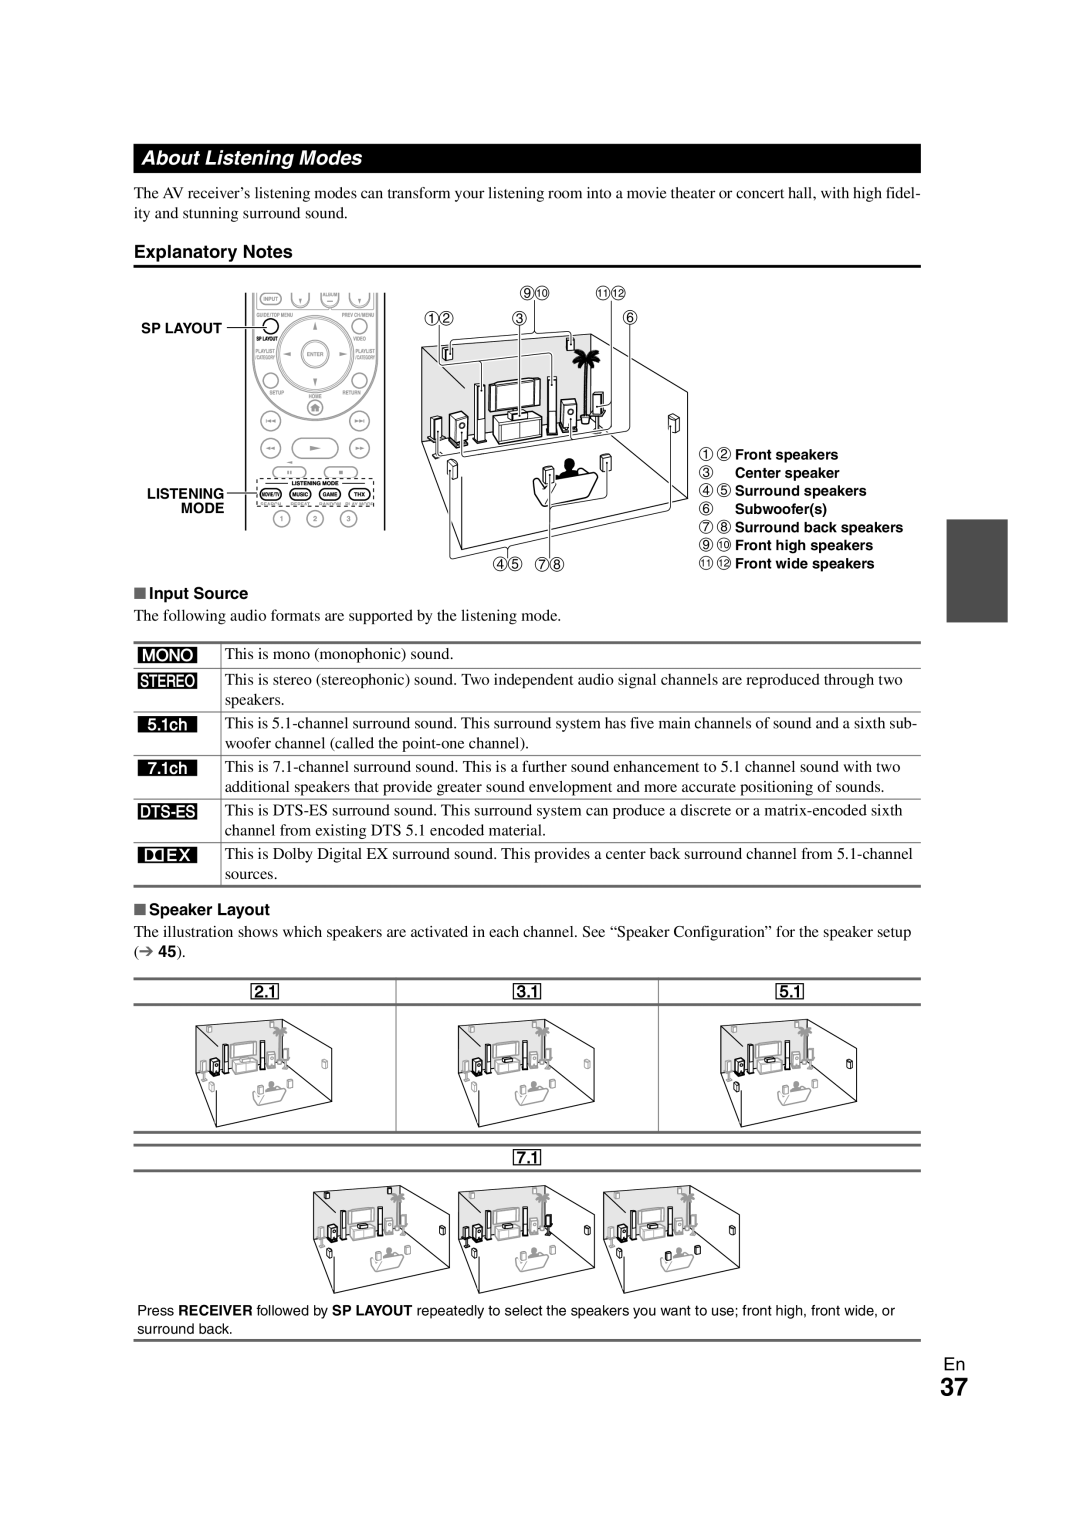 Onkyo TX-NR708 instruction manual About Listening Modes, Explanatory Notes, Input Source, Speaker Layout 